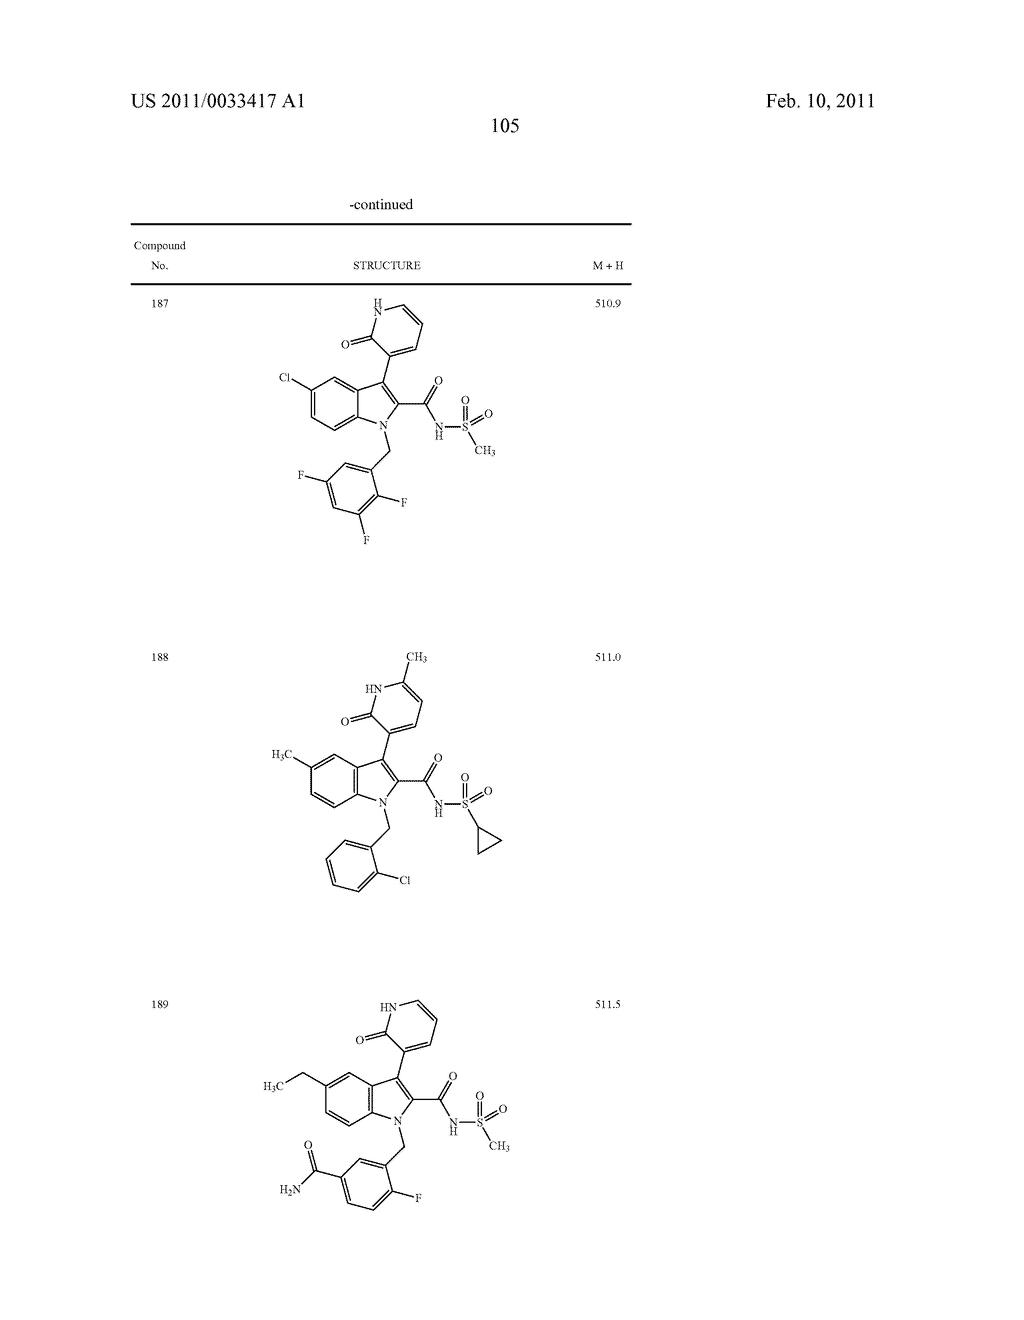 2,3-SUBSTITUTED INDOLE DERIVATIVES FOR TREATING VIRAL INFECTIONS - diagram, schematic, and image 106